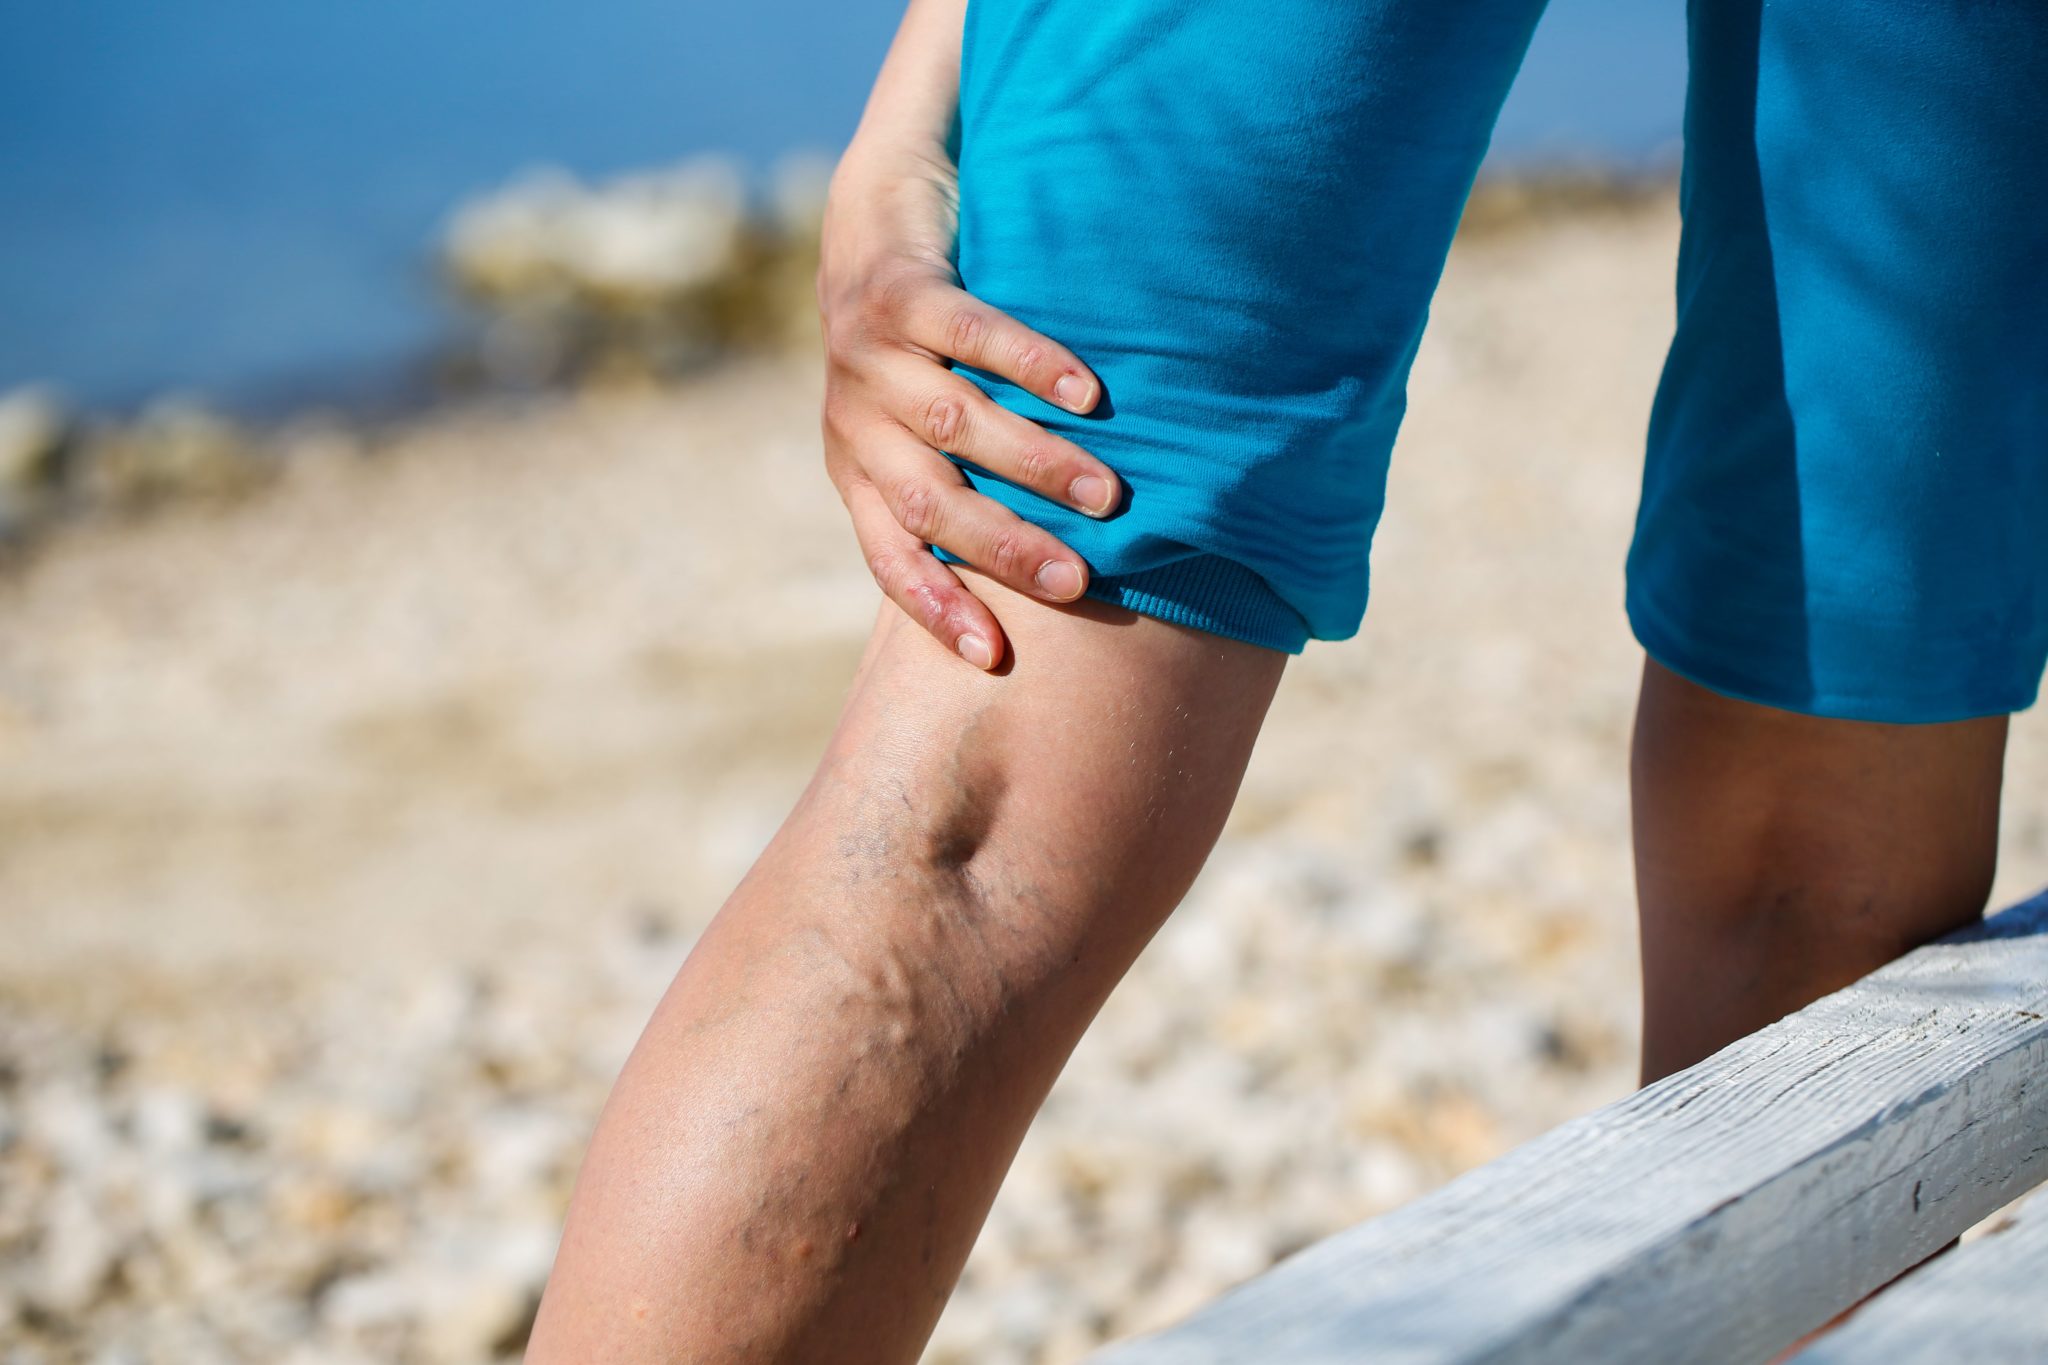 A woman with varicose veins holds her leg in pain